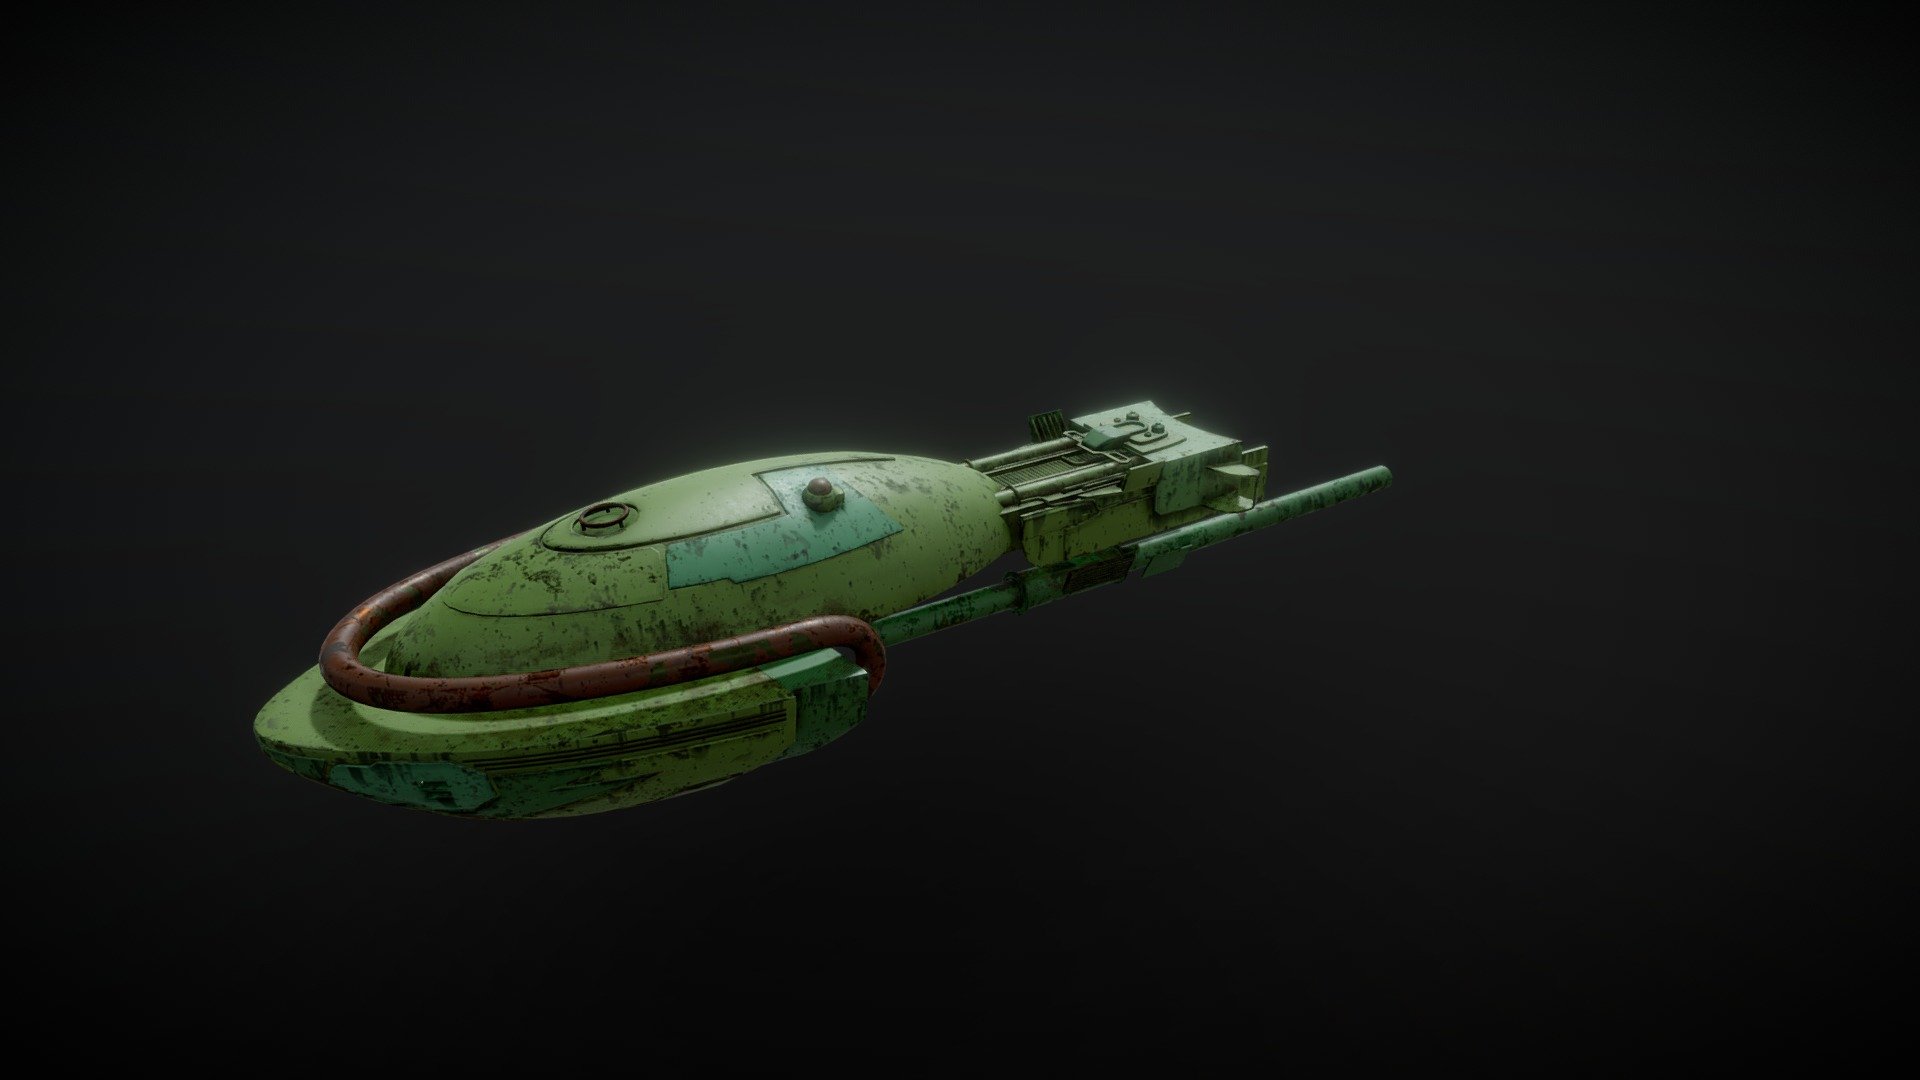 Testing out some texture styles on some pieces of an upcoming Klingon Bird of Prey model. This is just a small preview/test 3d model